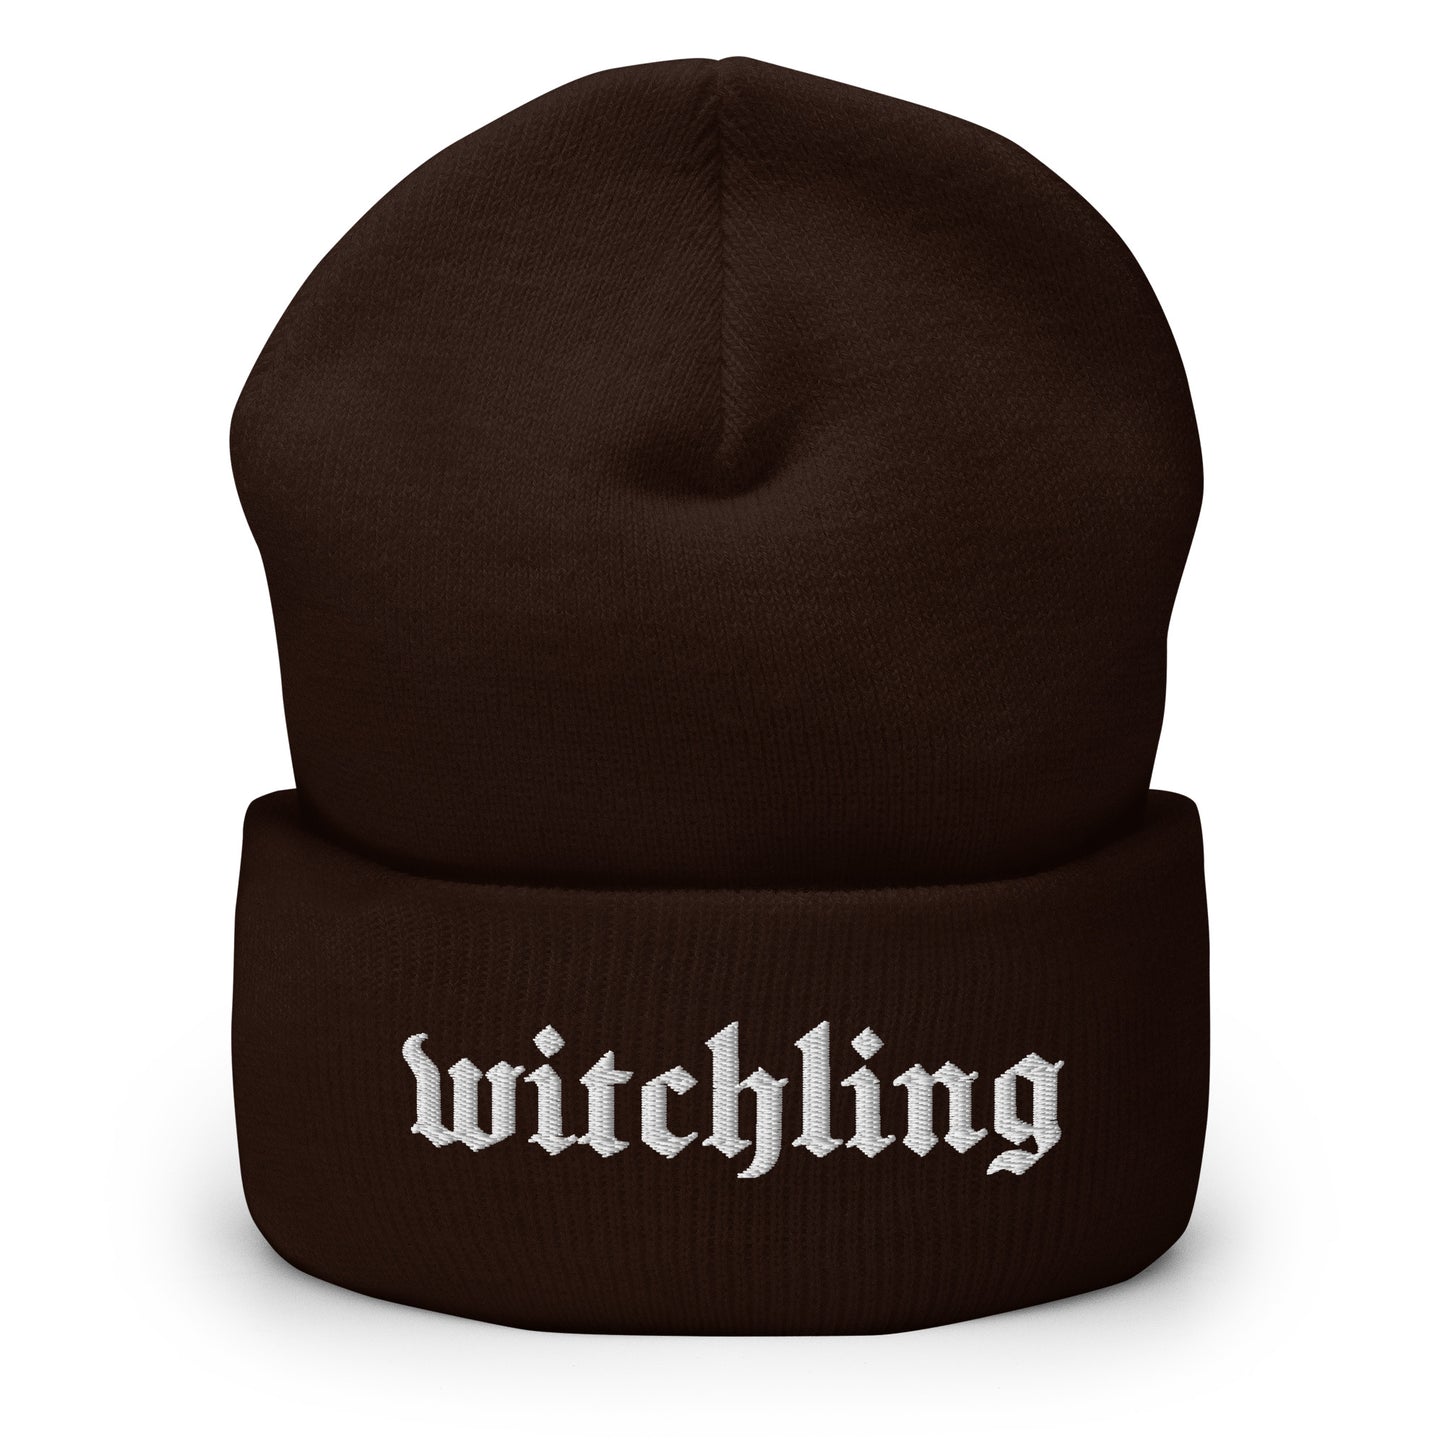 Witchling - Cuffed Beanie